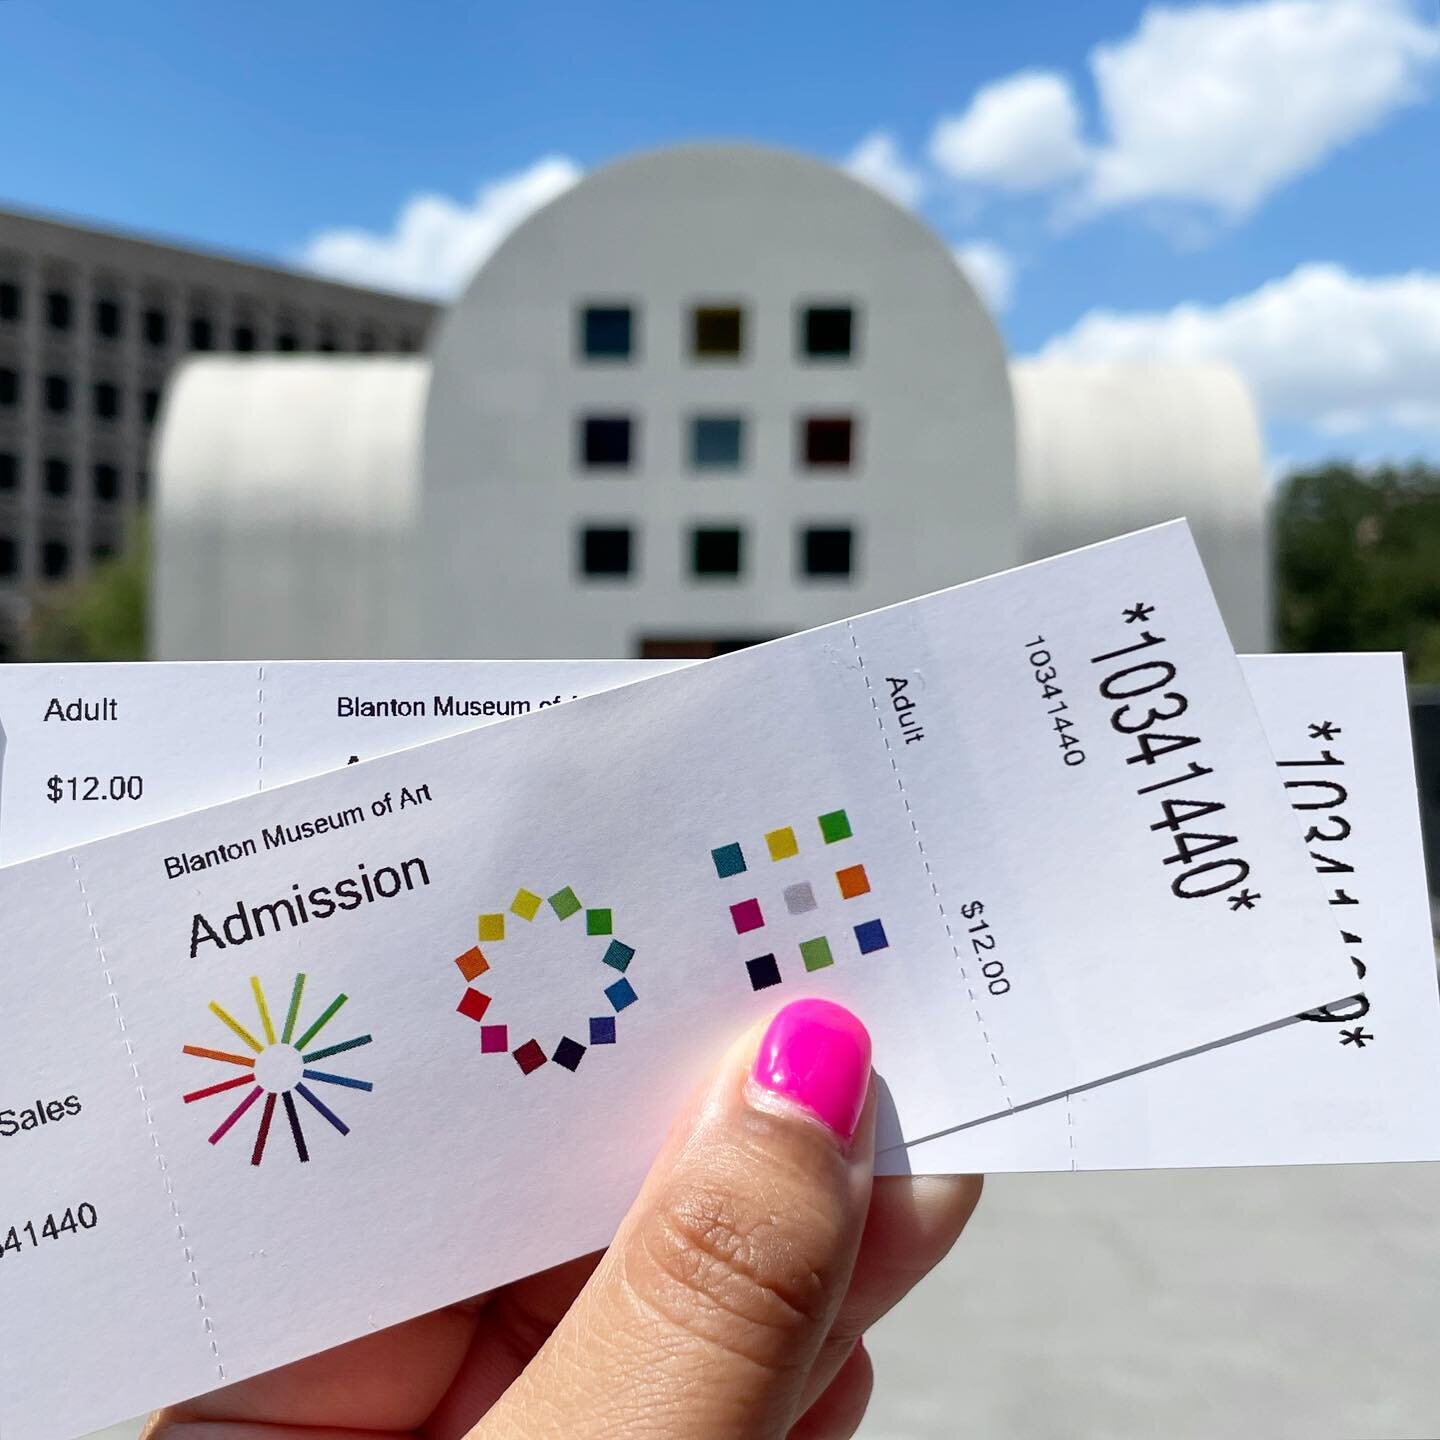 Plays a game of&hellip; &ldquo;let&rsquo;s match what we see with  @blantonmuseum&rsquo;s admission ticket&rdquo;. 🎟 💖 so clever. 

🖌 #gurlmuseumday